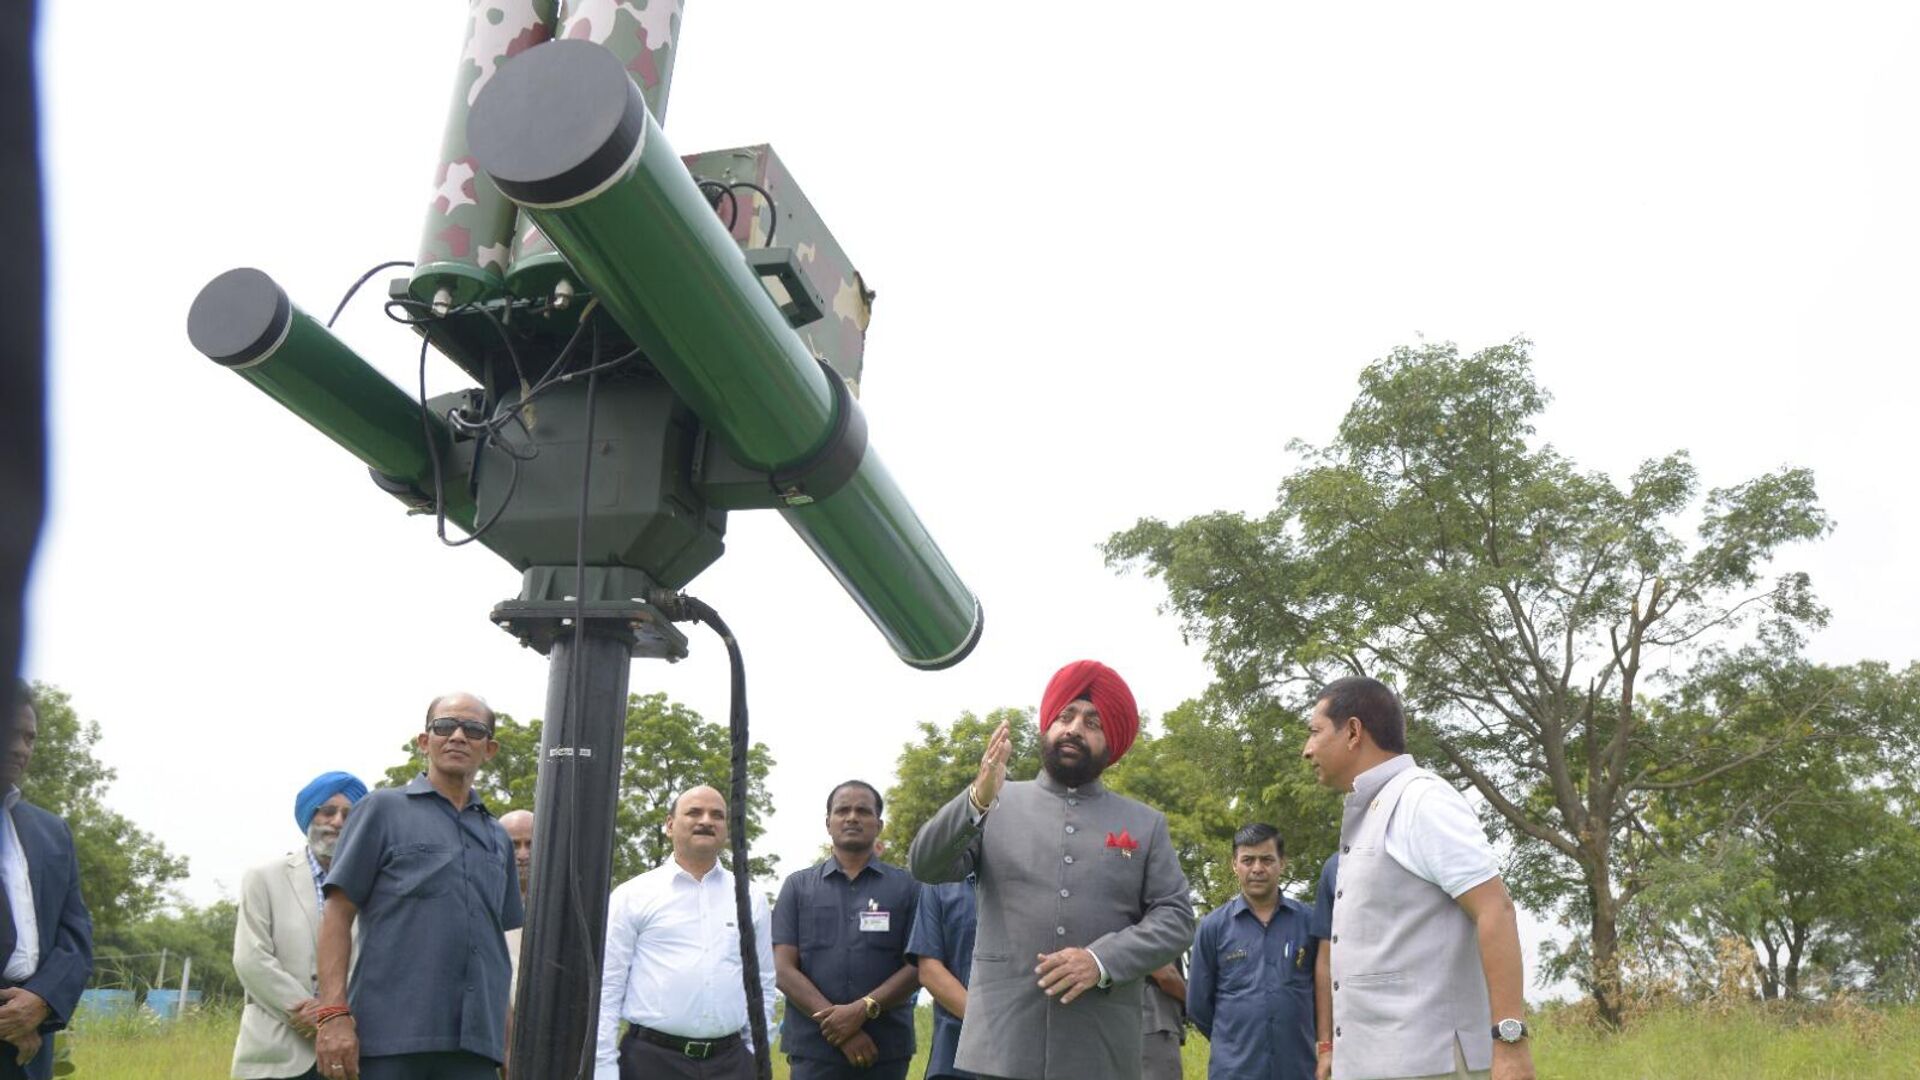 Is India's military drone industry ready to go?